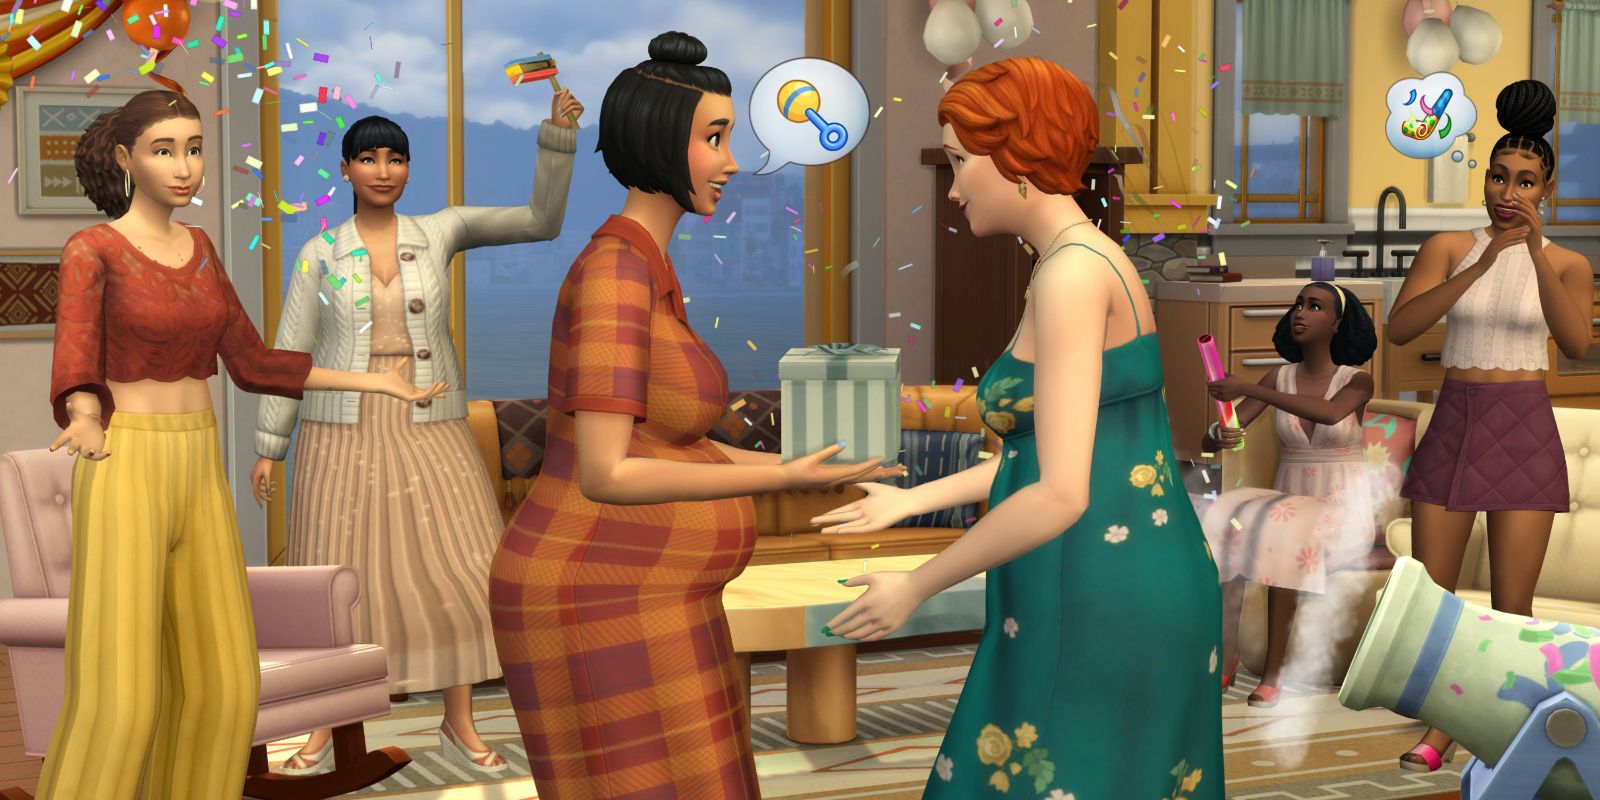 A Sim celebrates their pregnancy with a baby shower